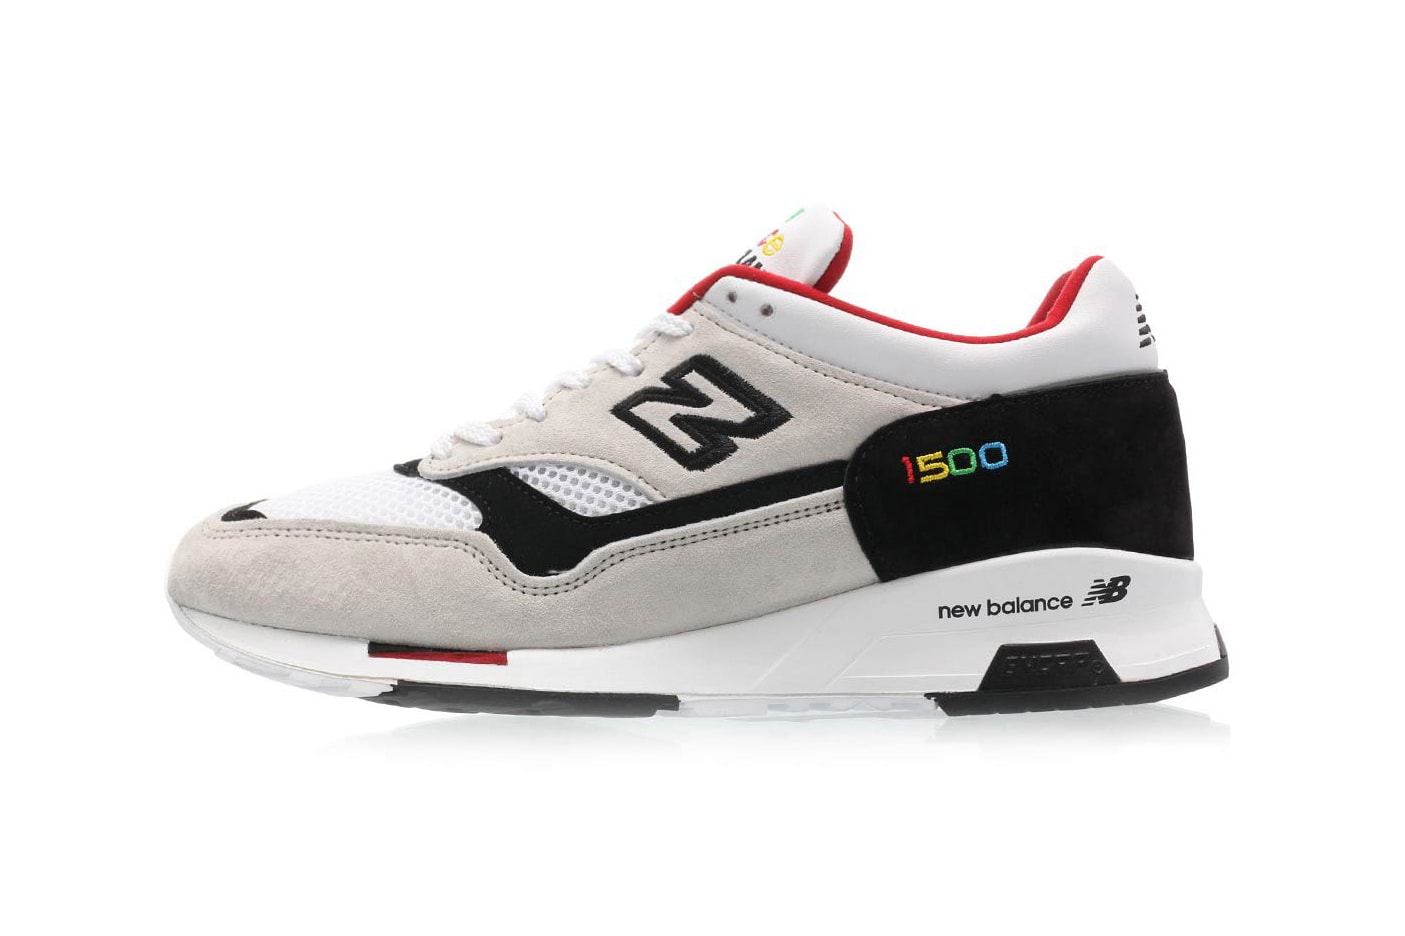 new balance 1500 made in england colorway release footwear shoes sneakers drops